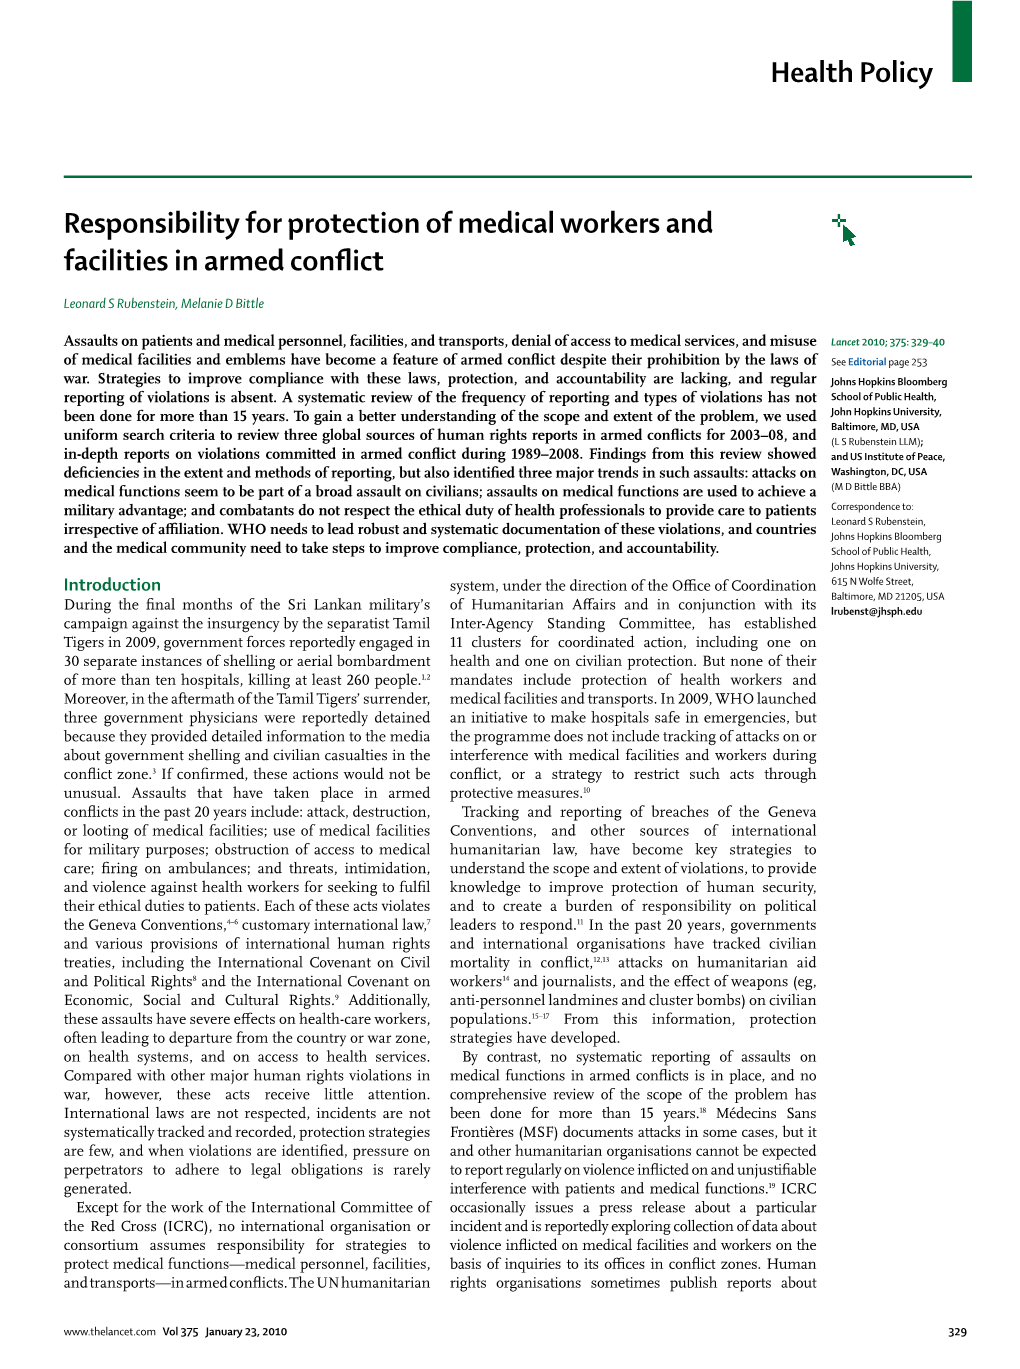 Responsibility for Protection of Medical Workers and Facilities in Armed Conﬂ Ict